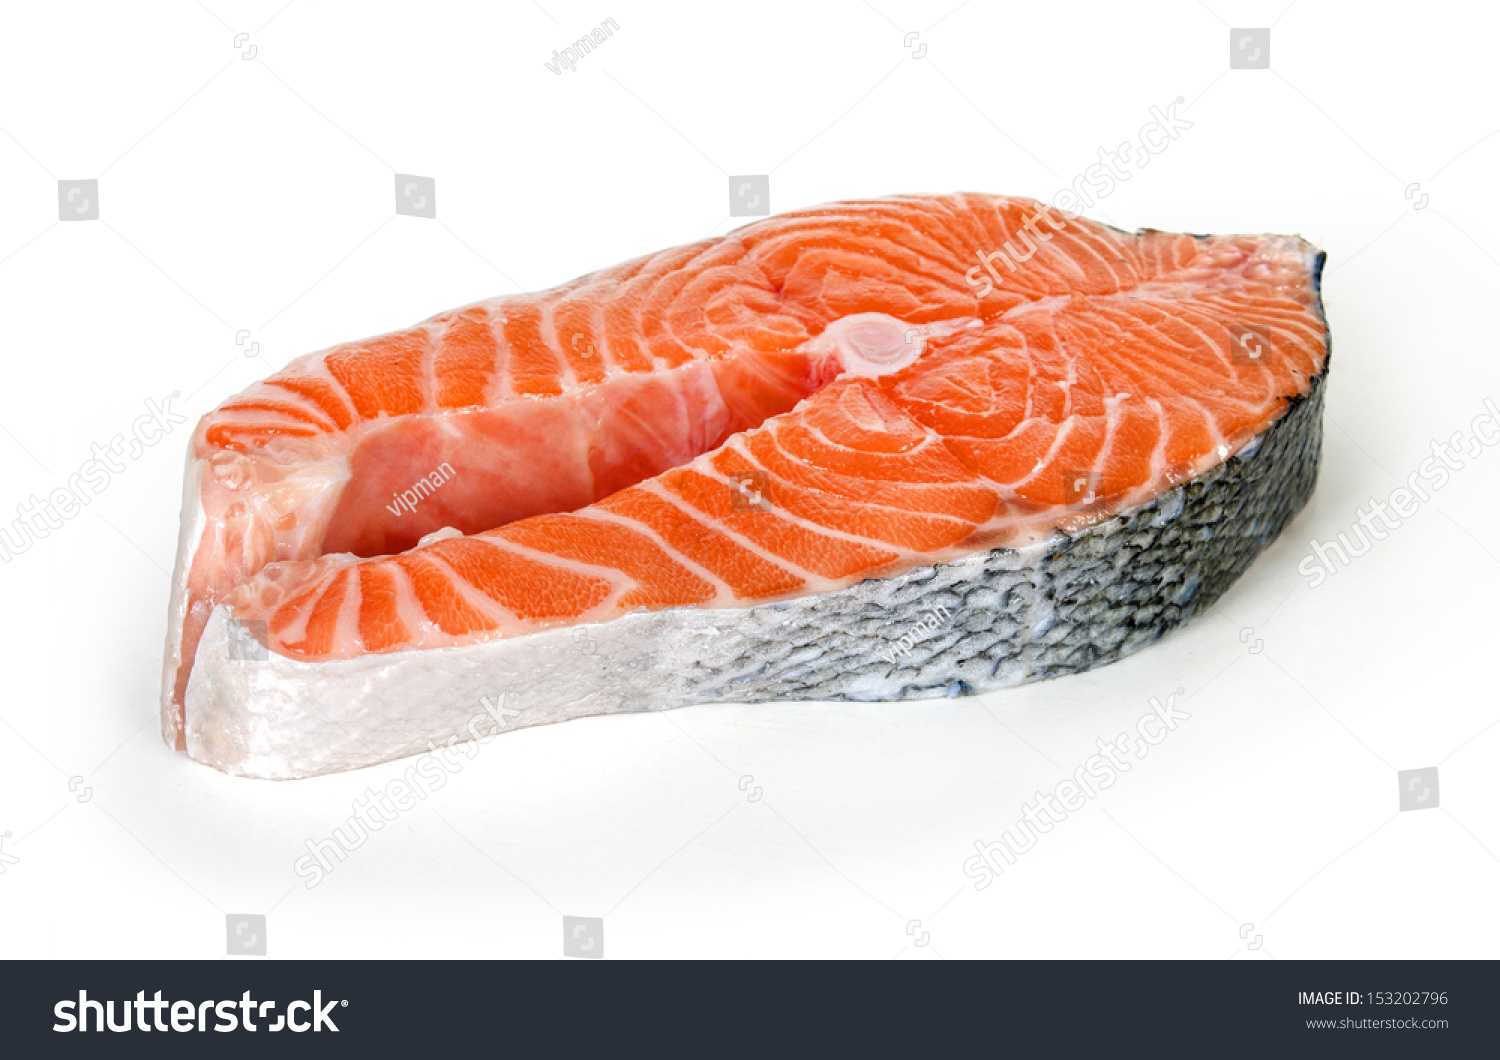 Fresh Uncooked Red Fish Fillet Over Stock Photo 153202796 - Shutterstock